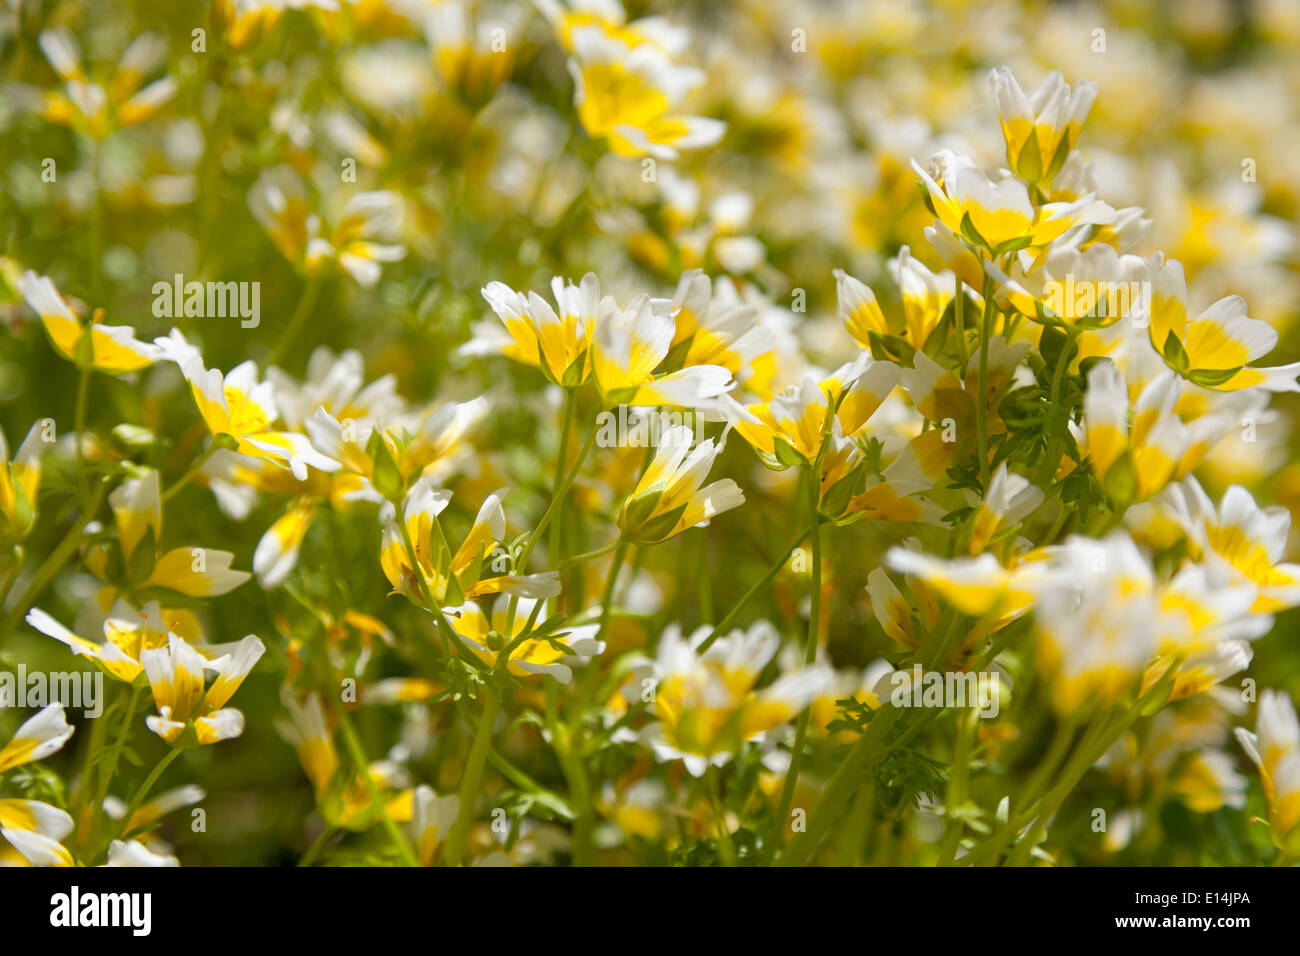 Flowering poached egg plants Stock Photo